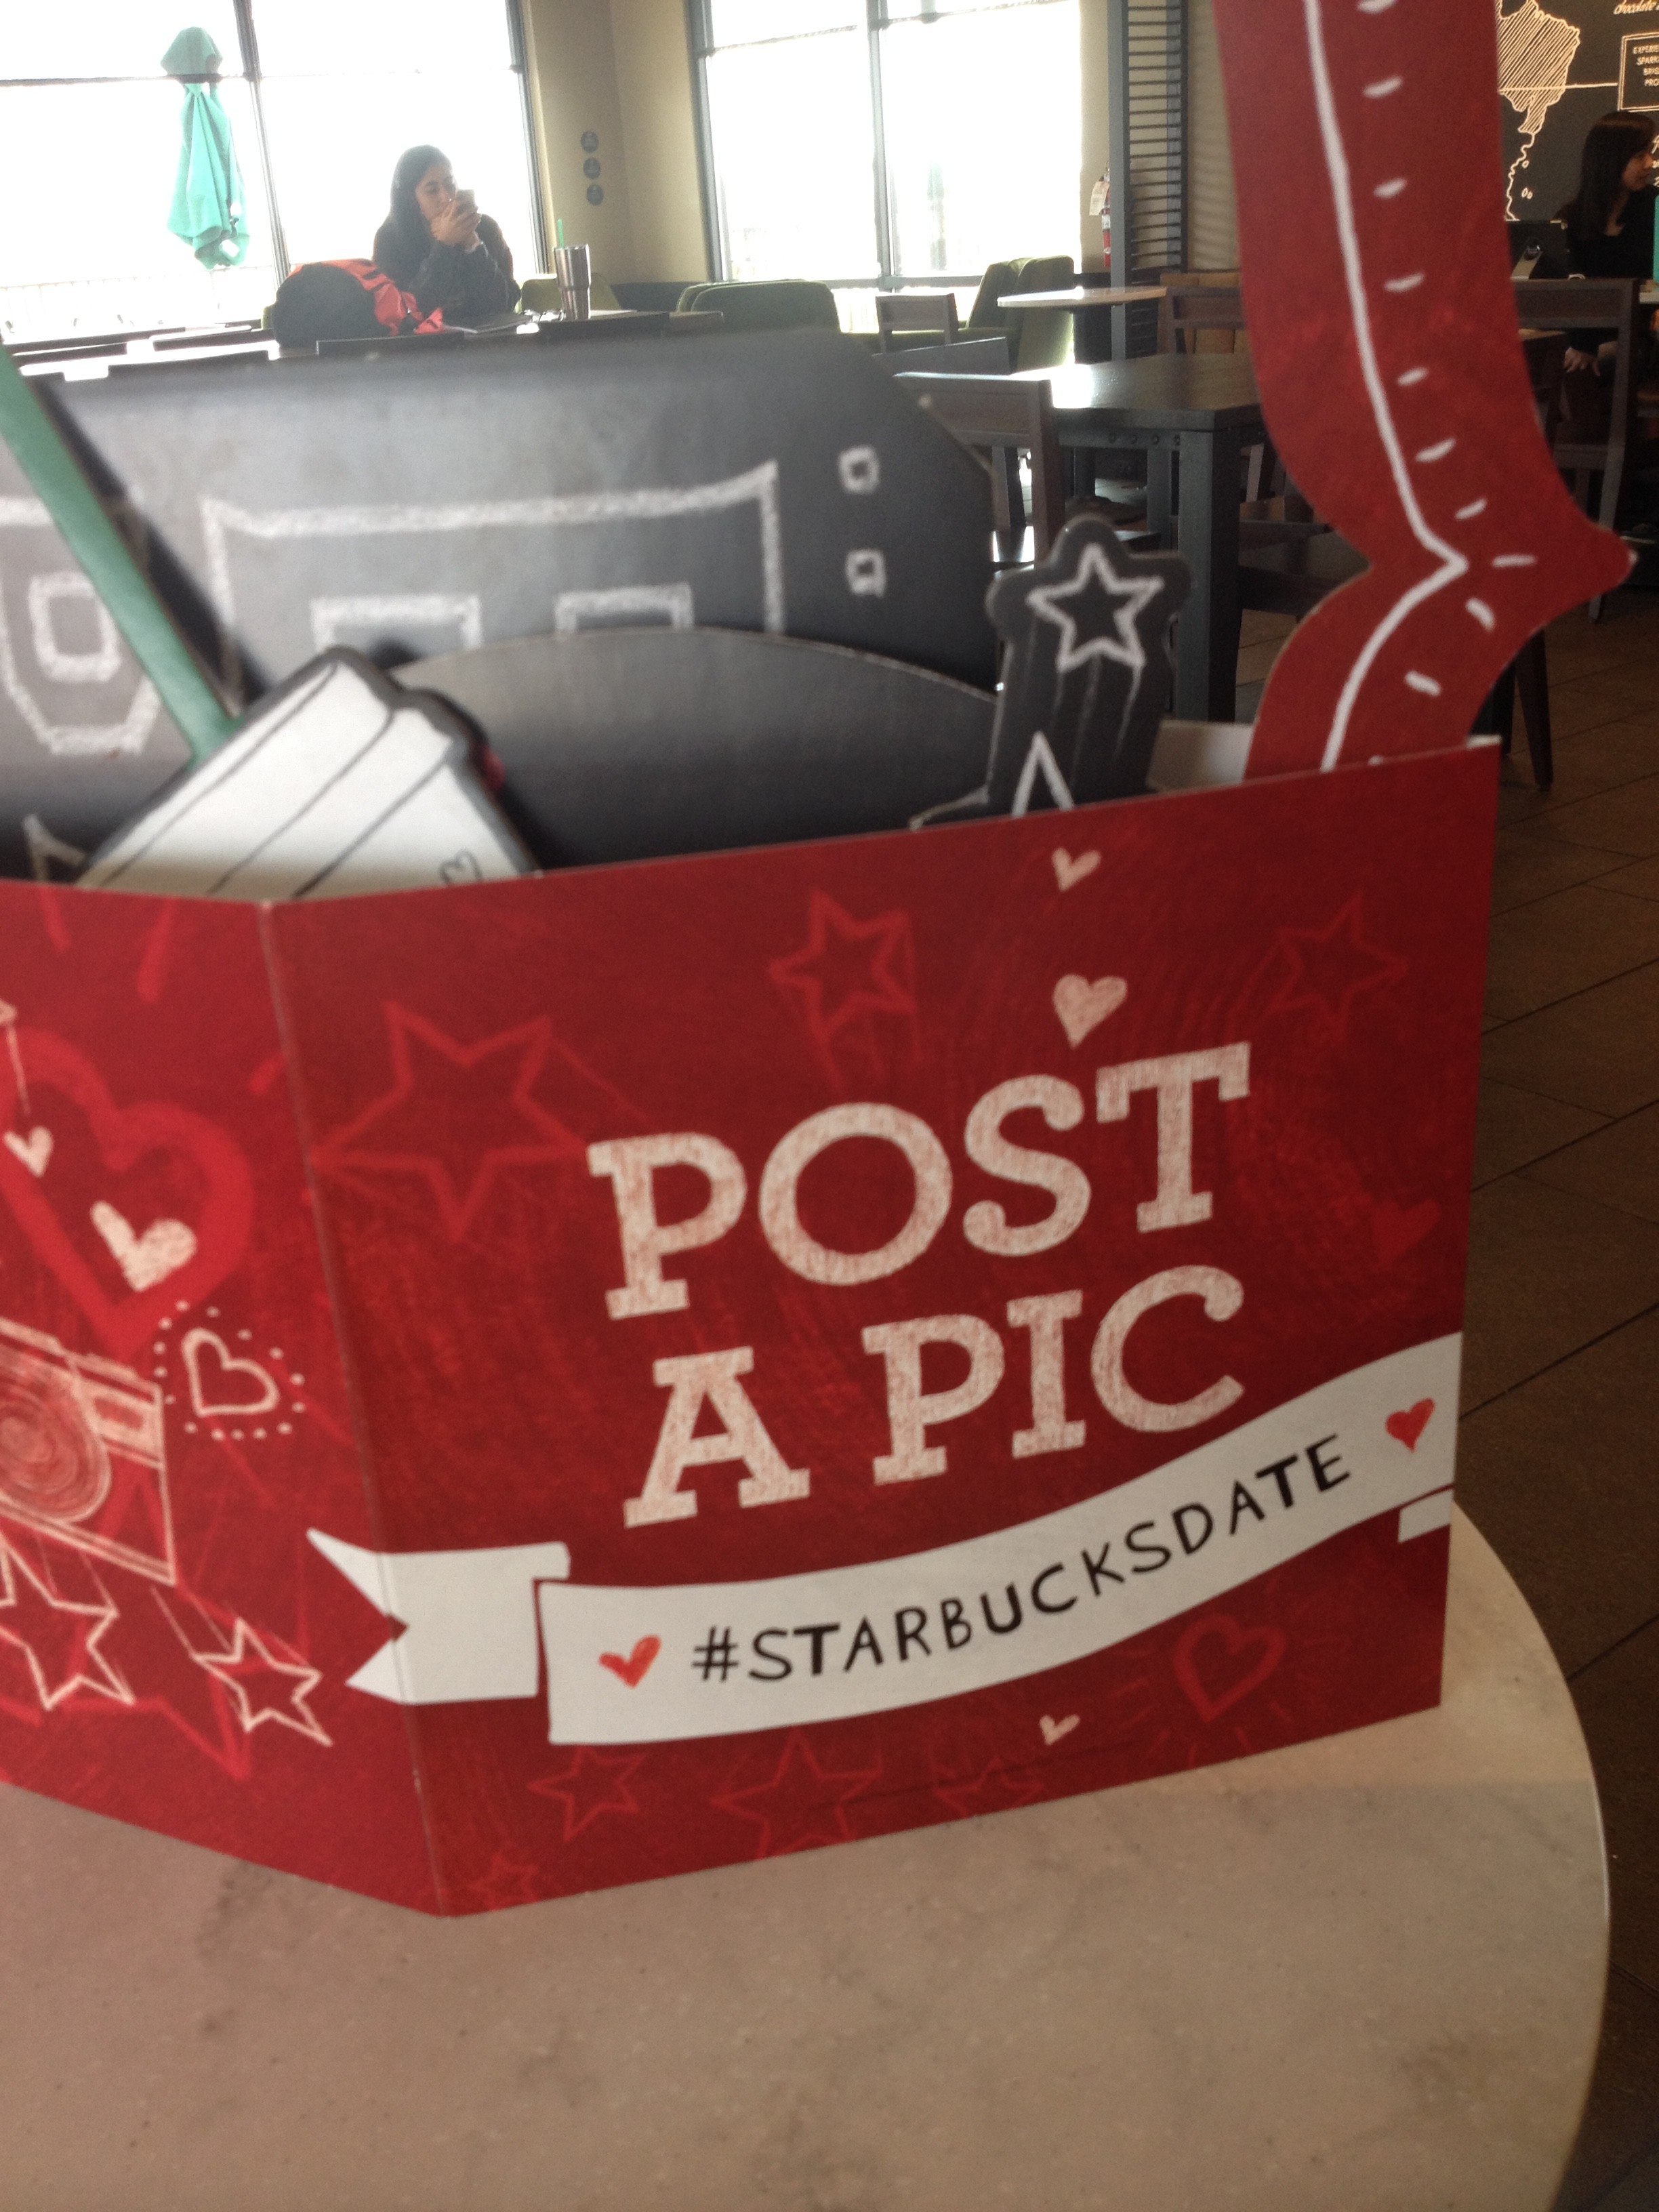 Just what you need to make your #StarbucksDate complete for social media! 